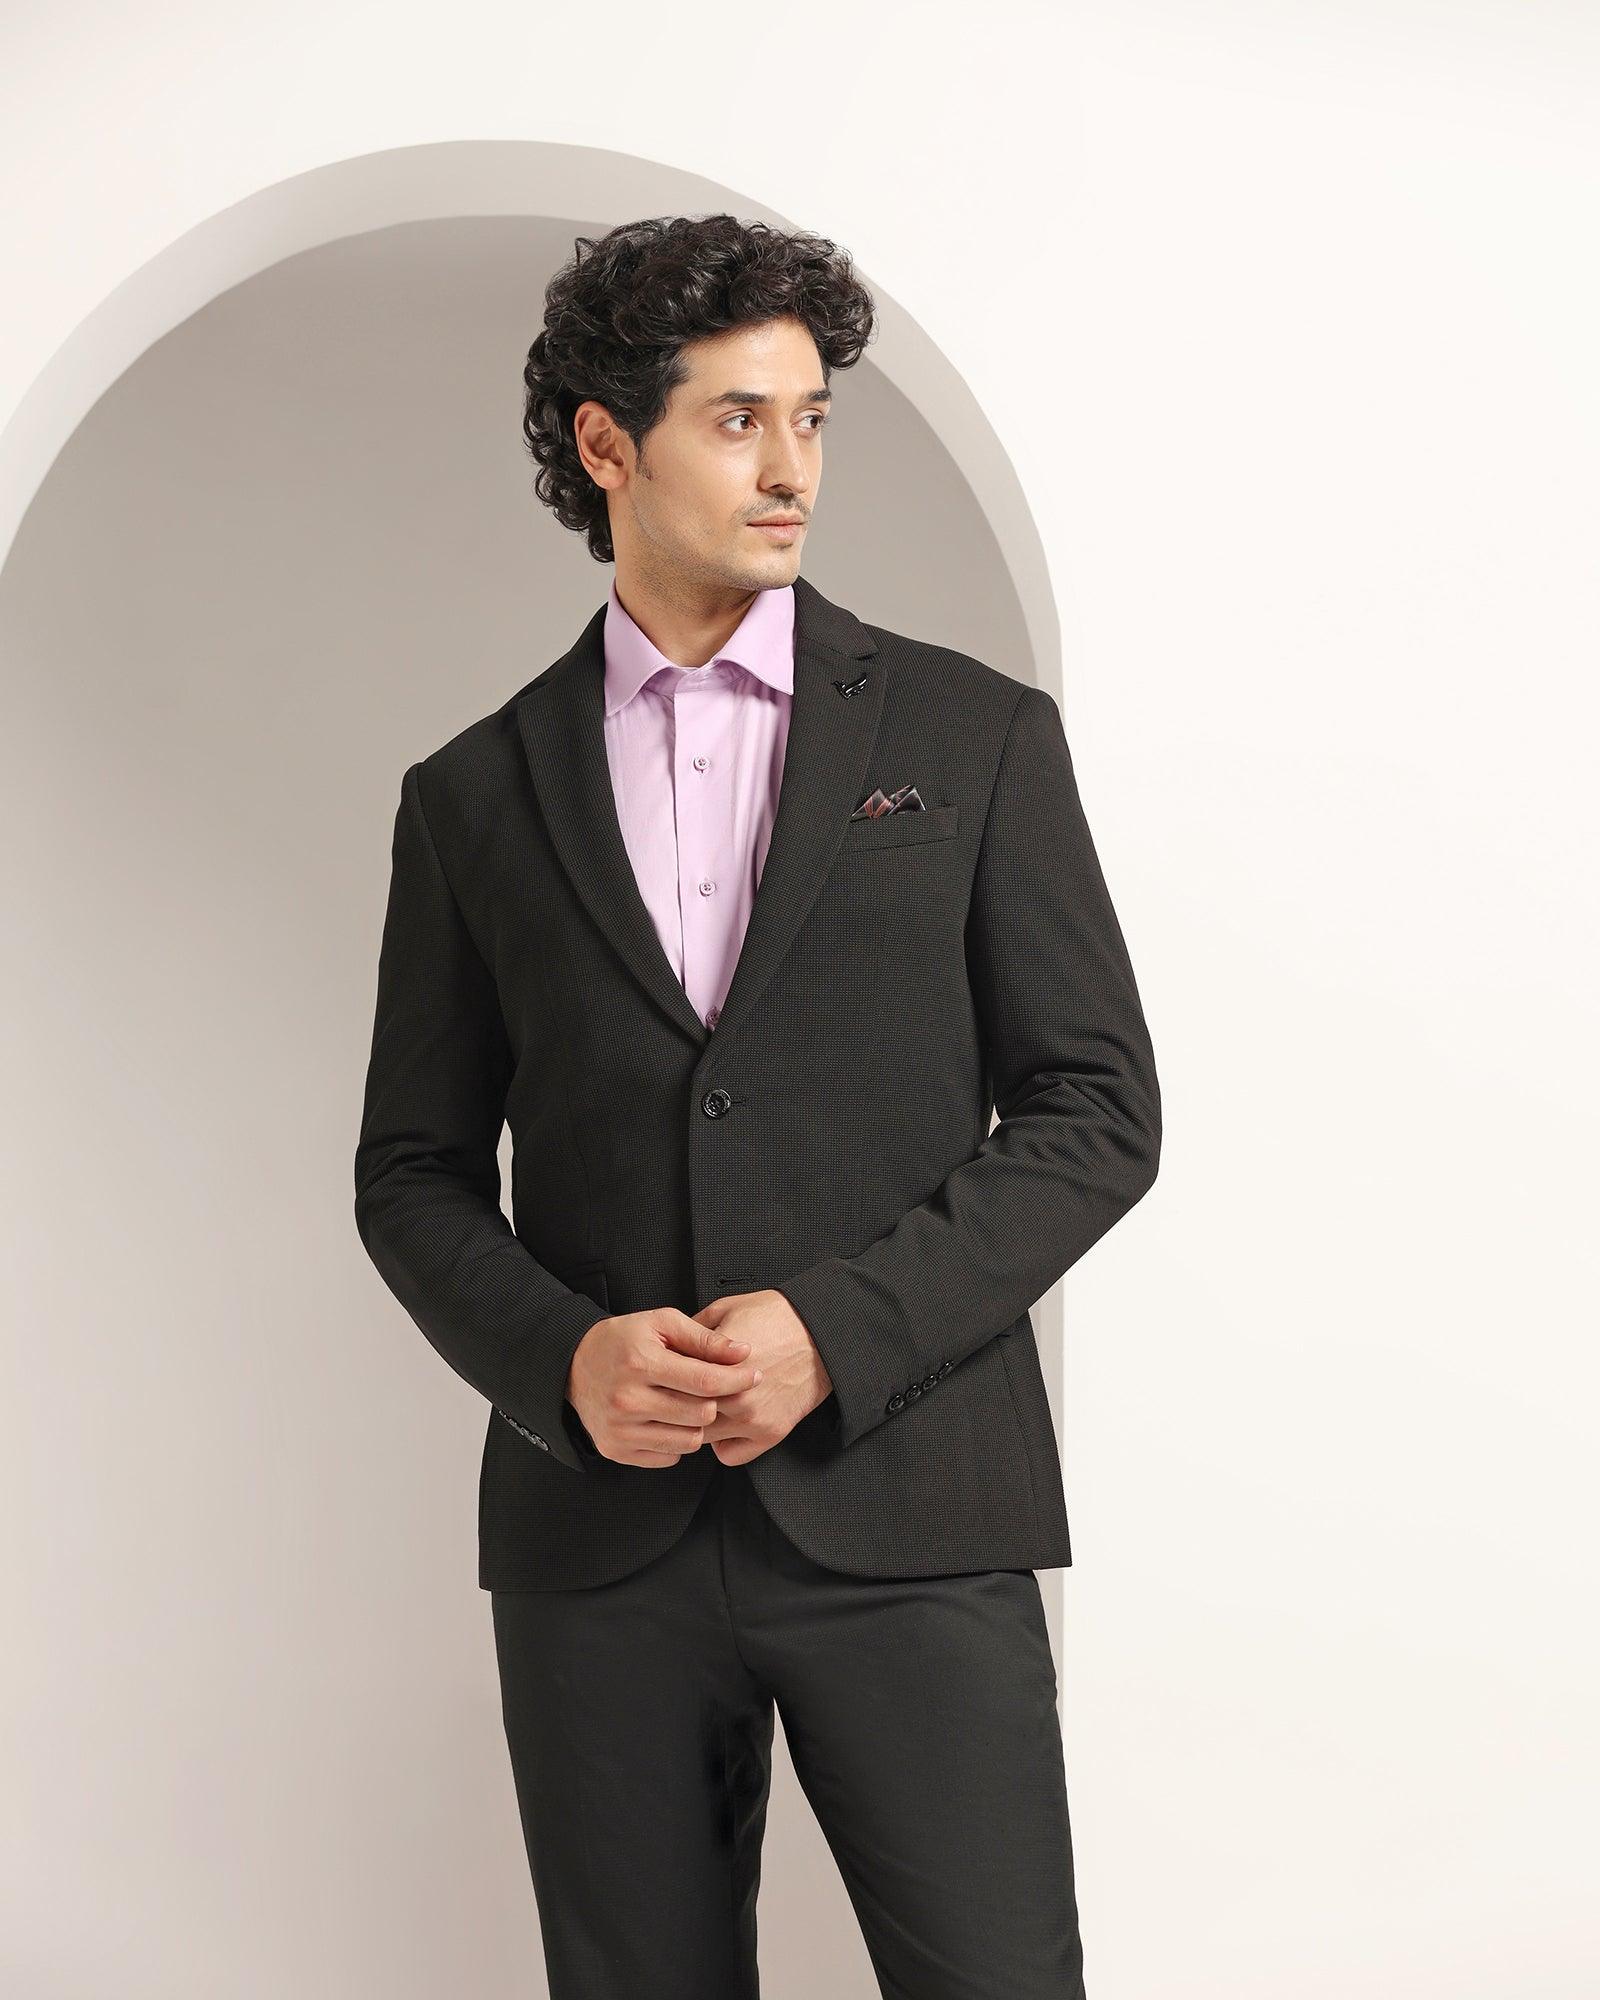 Men's Black Slim Fit Blazer Suit Jacket Price in India, Specs, Reviews,  Offers, Coupons